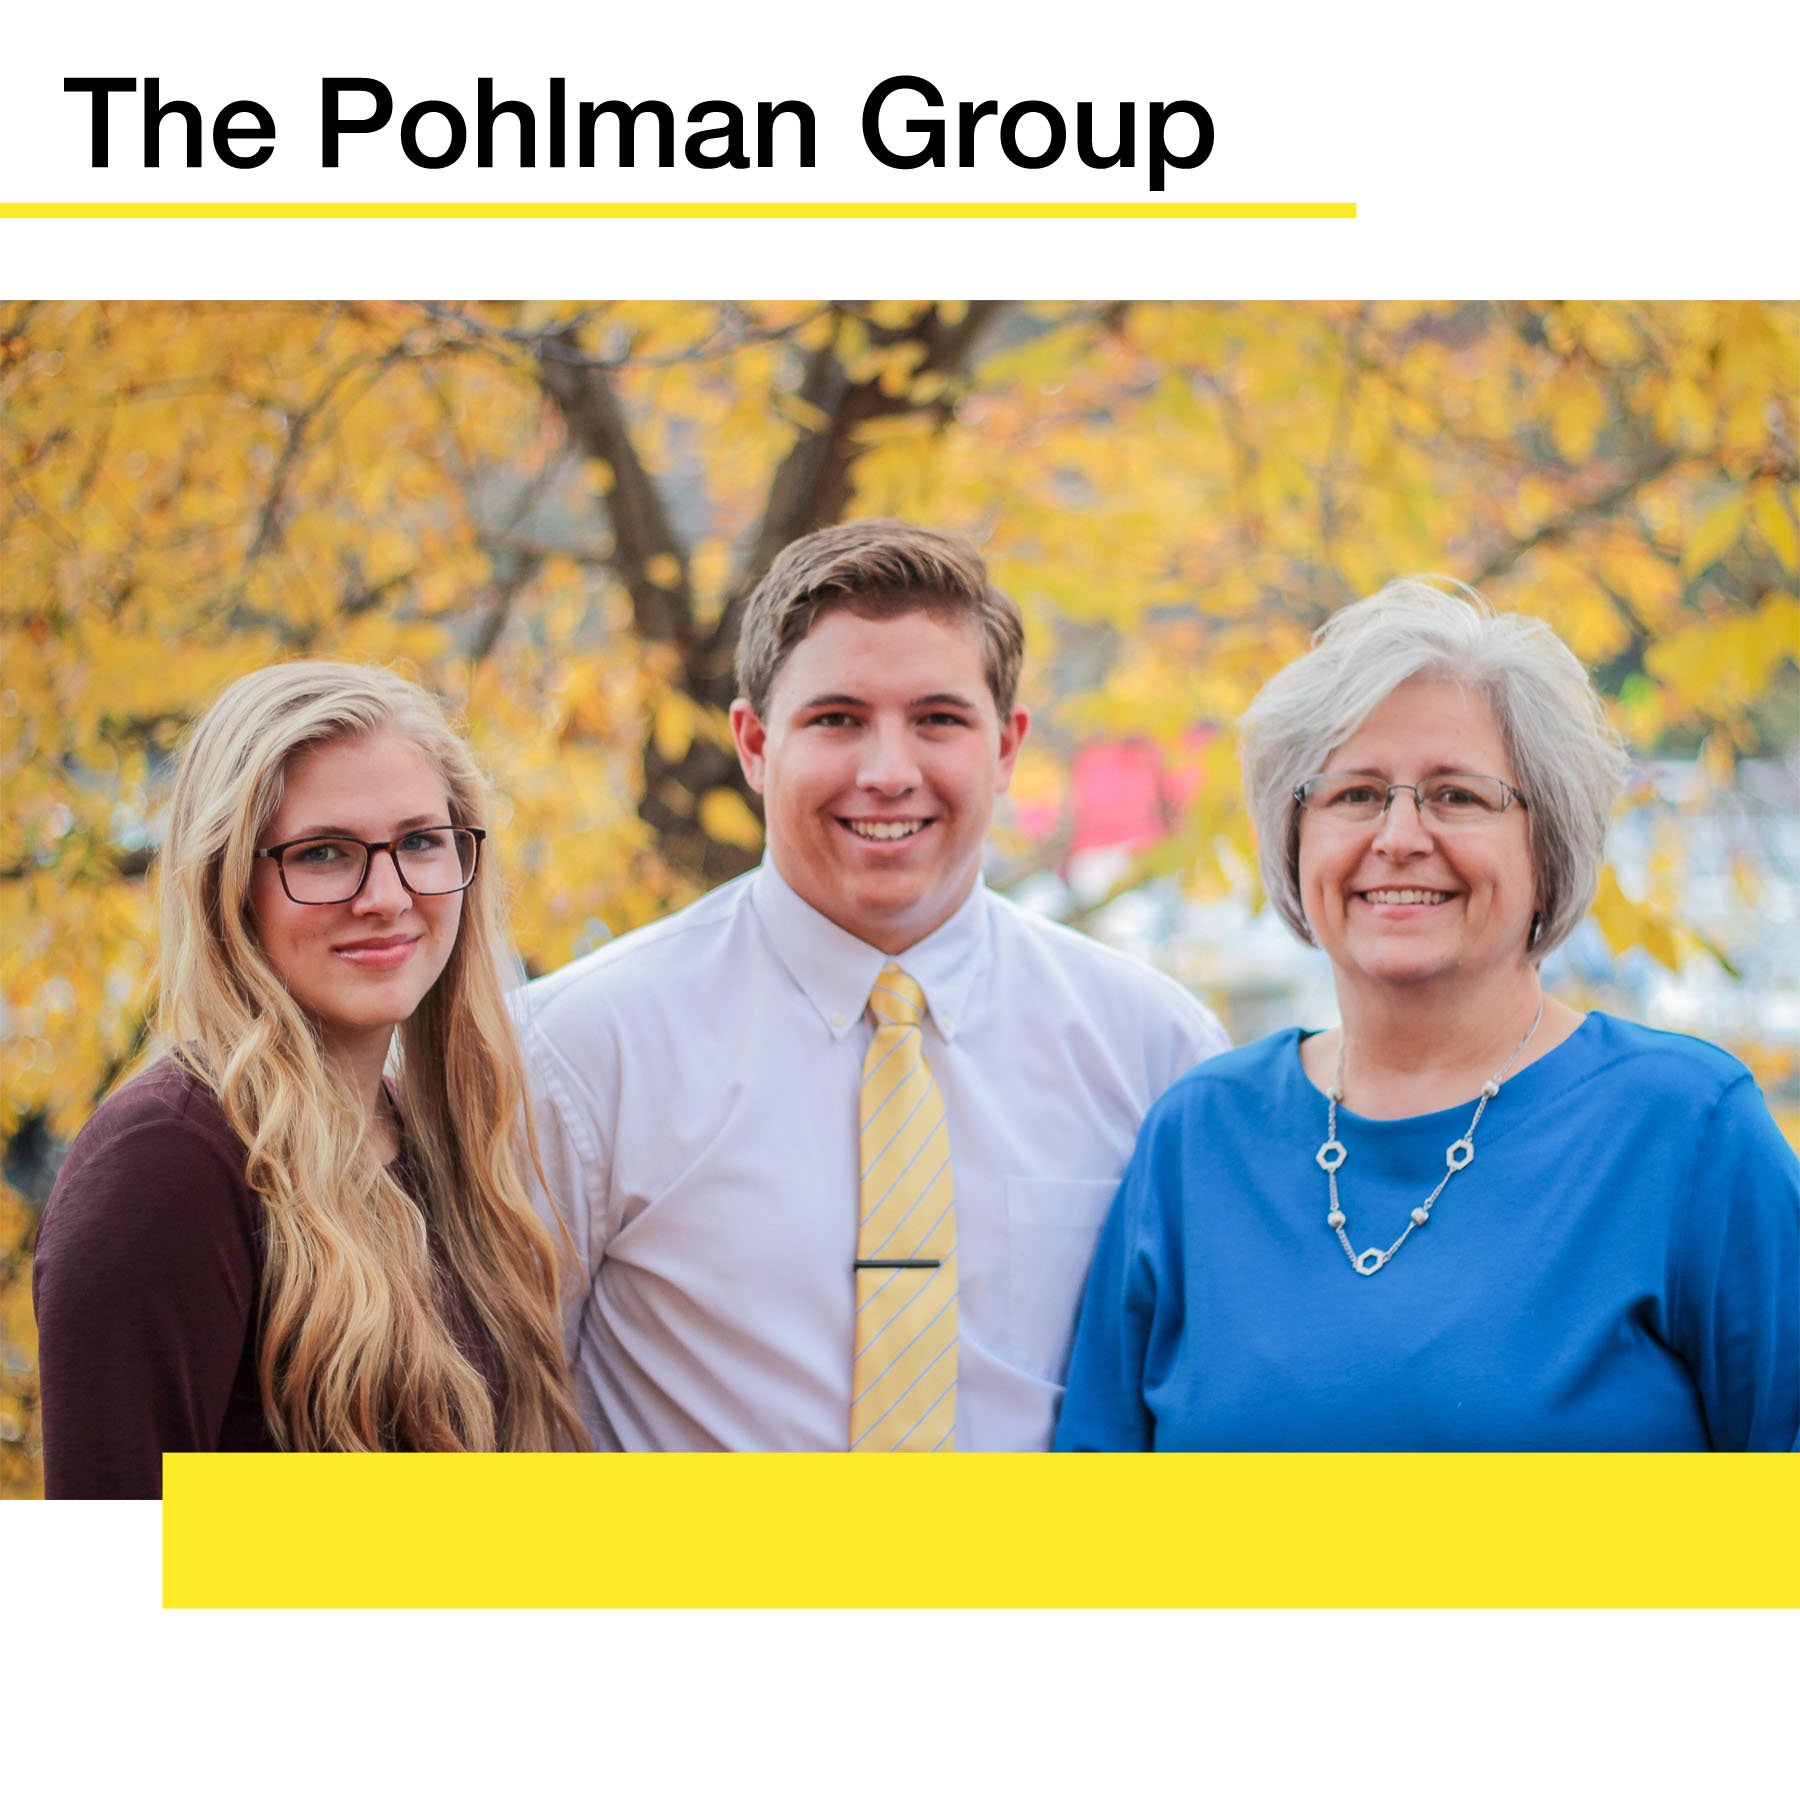 The Pohlman Group